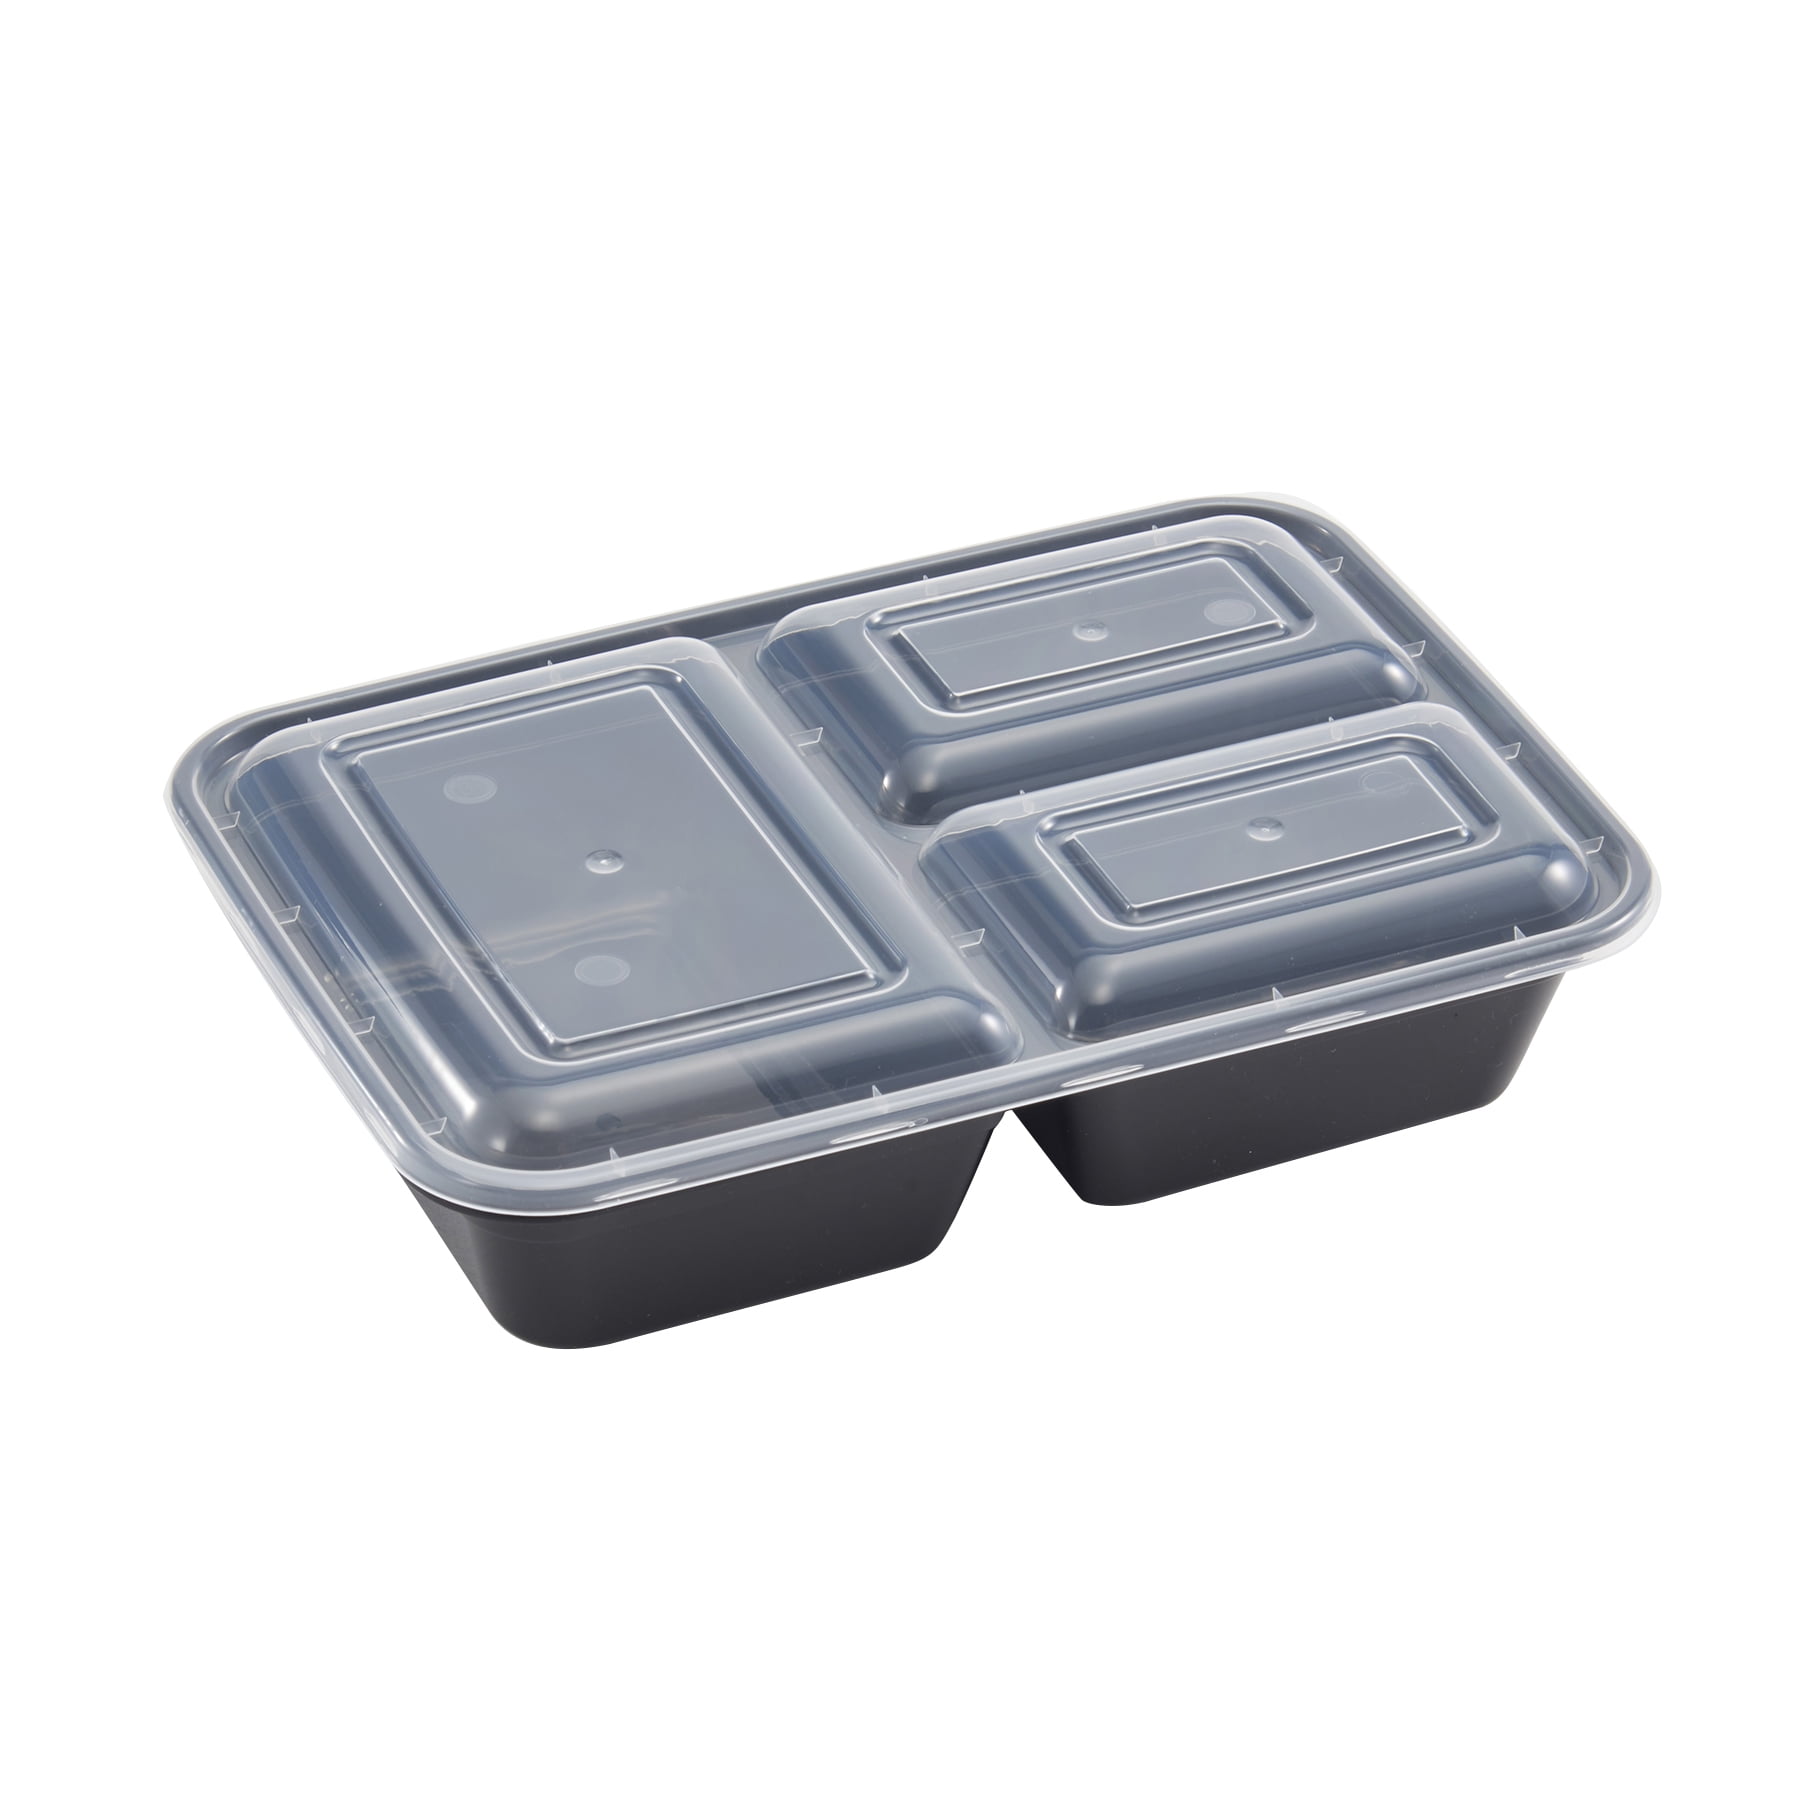 [30 Days supplies ]PACZSAVER Meal Prep Food Container with Lid BPA free